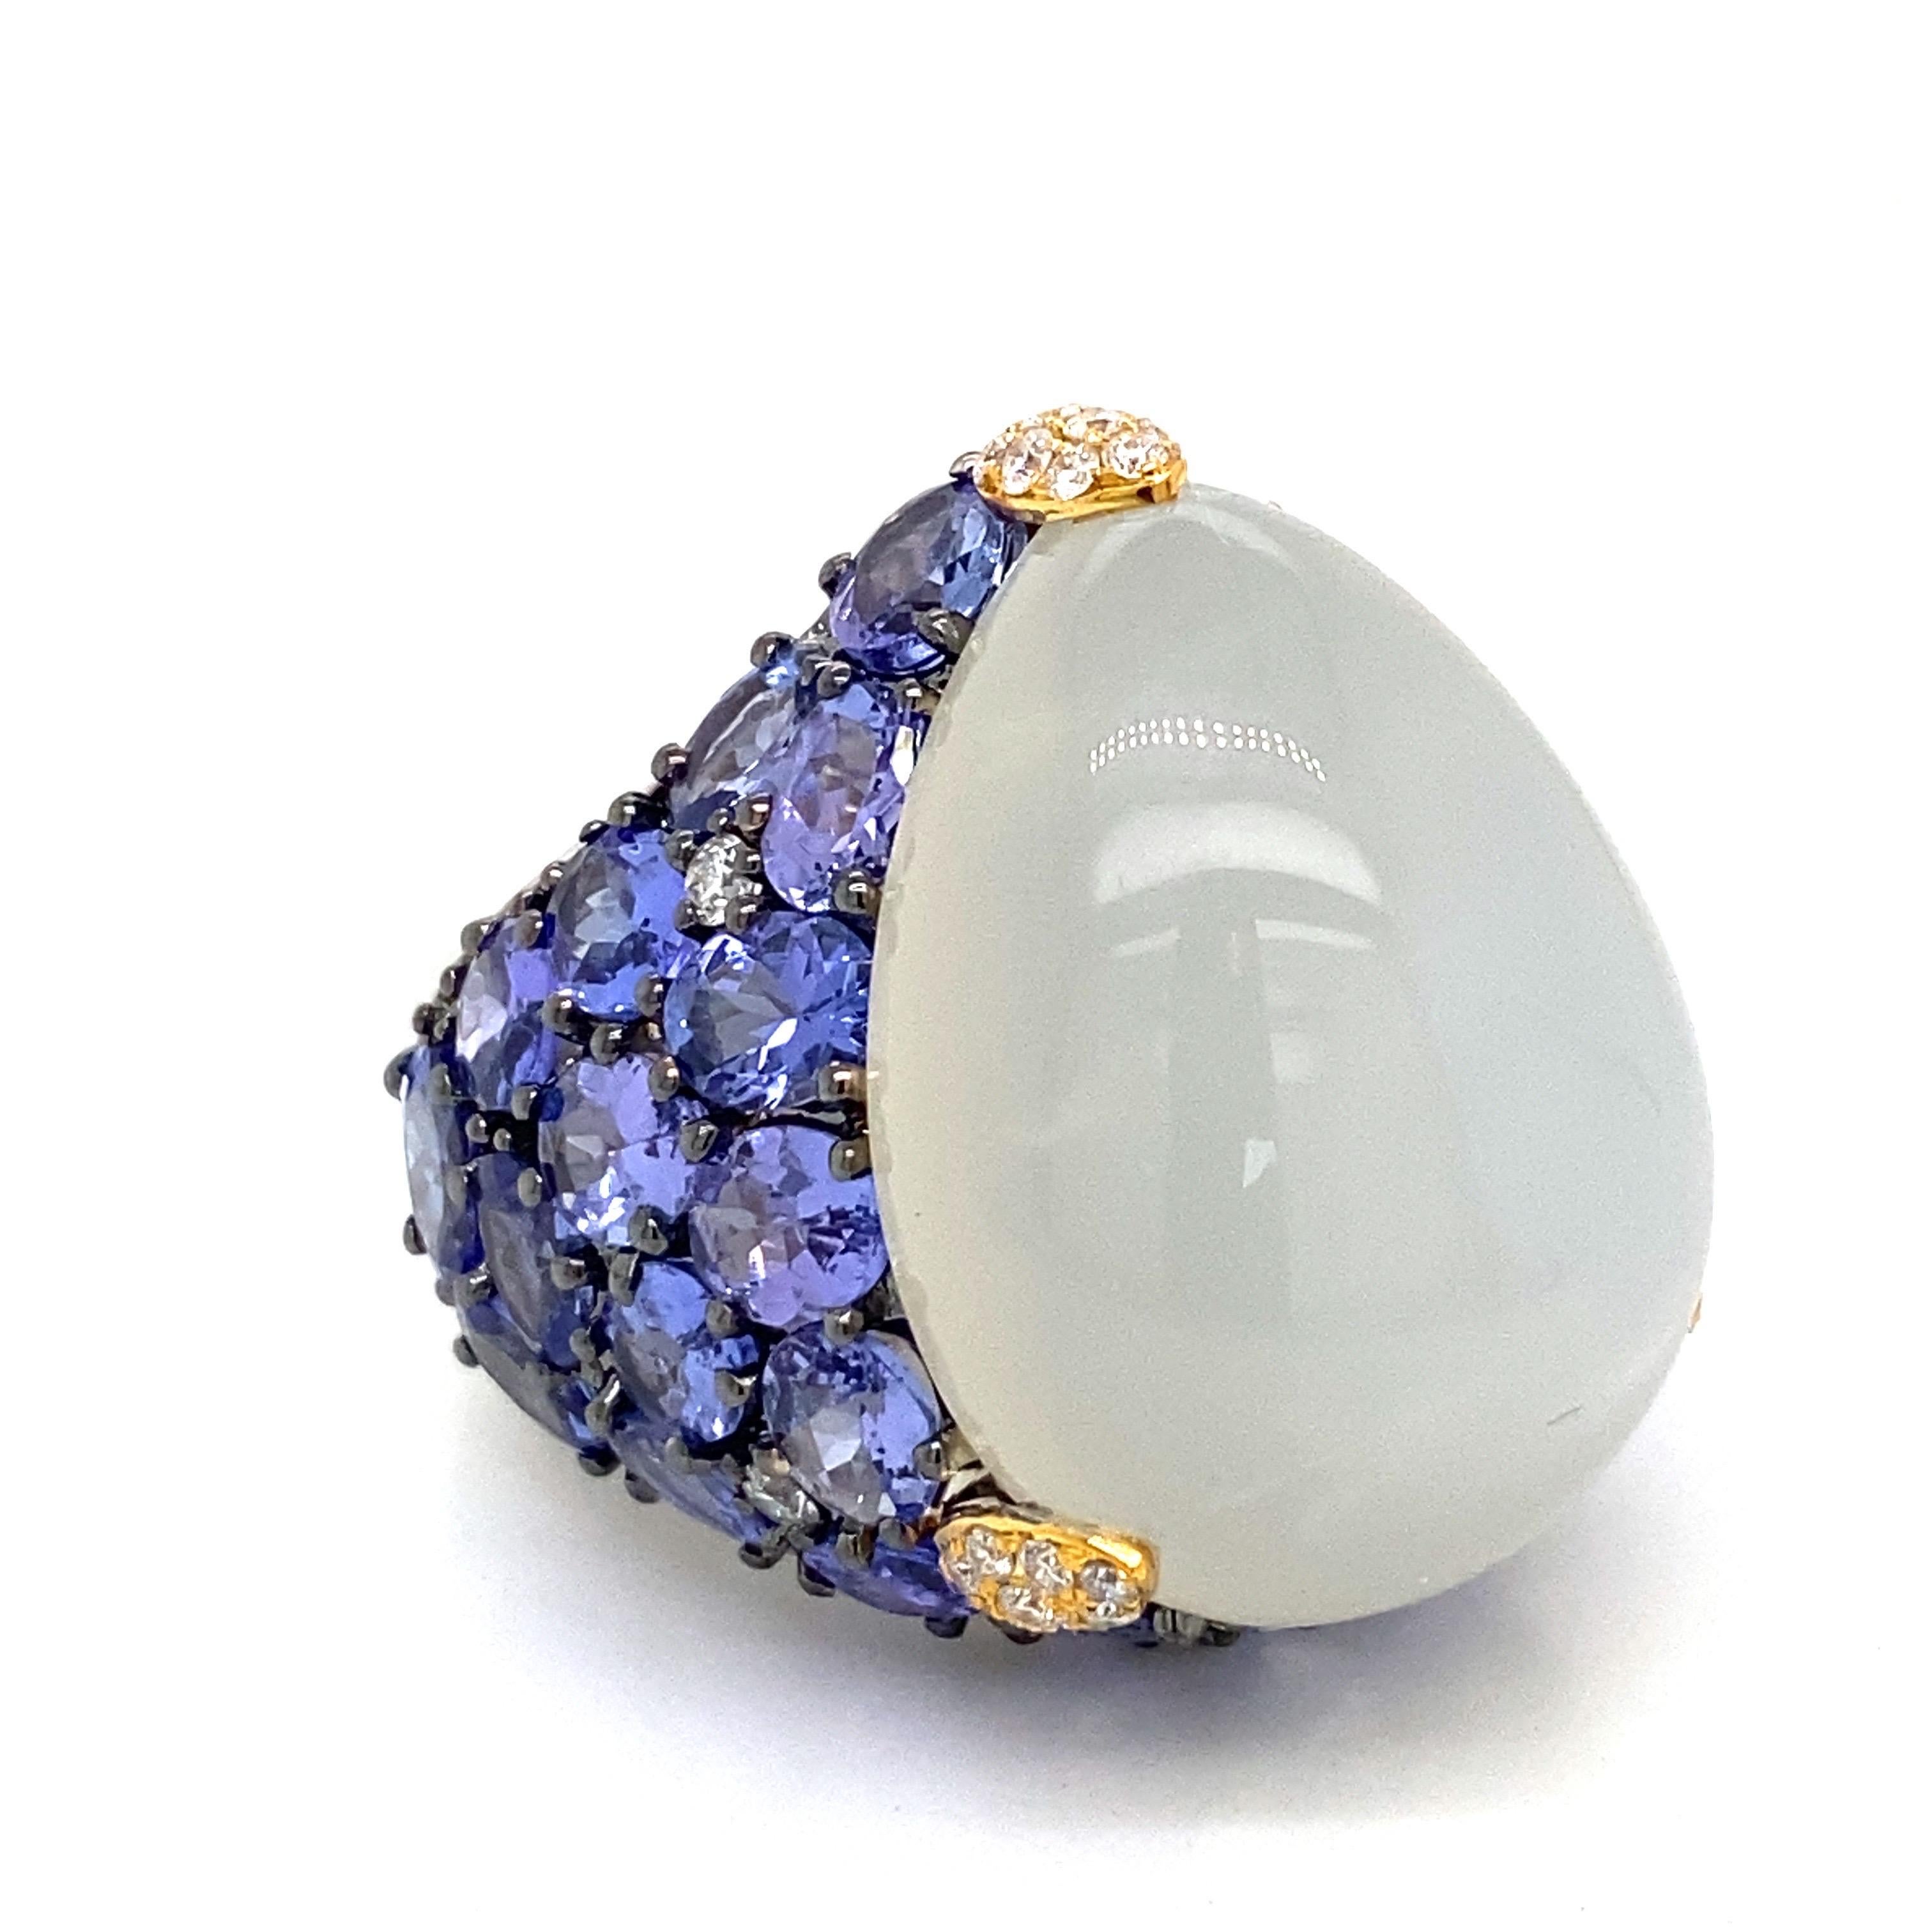 featuring Tanzanite and a large cabochon moonstone set in the center totaling approximately 41.00 carats. 